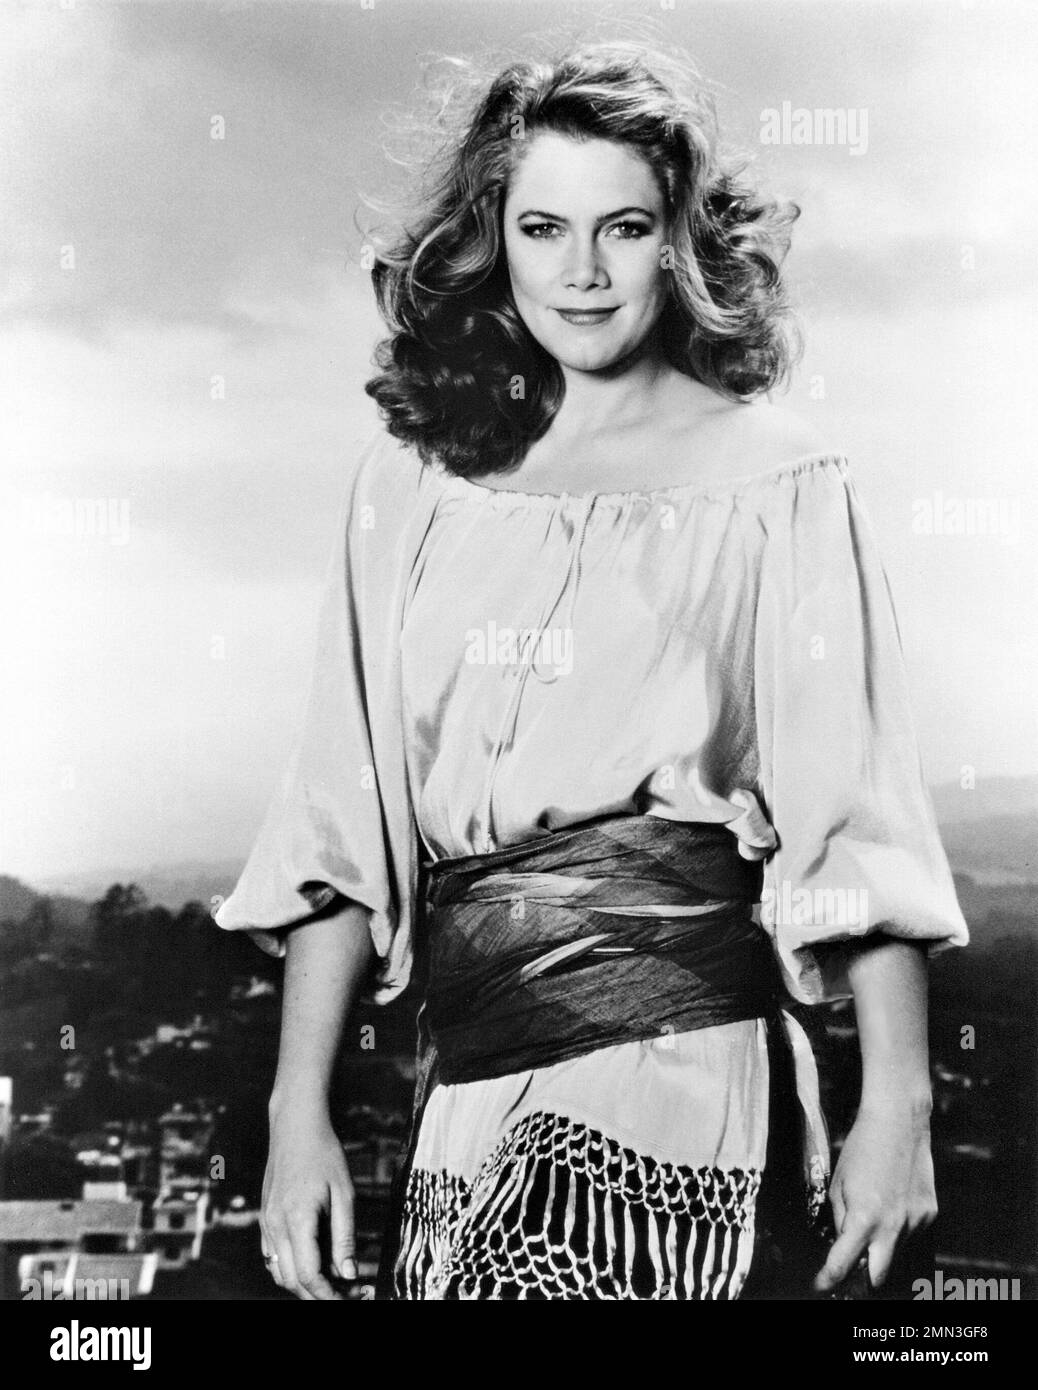 KATHLEEN TURNER in ROMANCING THE STONE (1984), directed by ROBERT ZEMECKIS. Credit: 20TH CENTURY FOX / Album Stock Photo